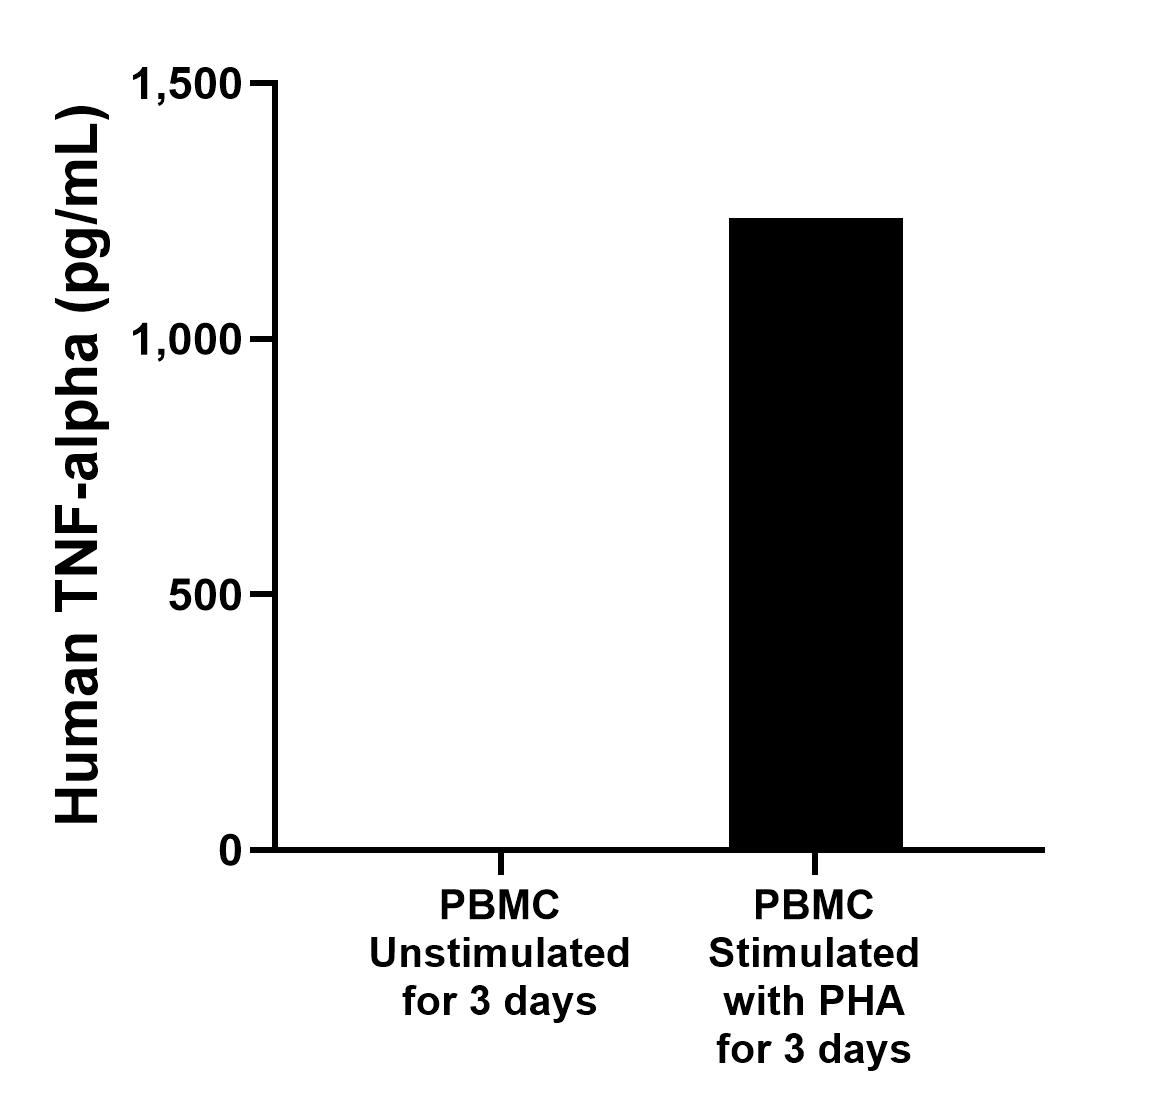 Human peripheral blood mononuclear cells (PBMC) were cultured unstimulated or stimulated with 10 μg/mL PHA for 3 days. The mean TNF-alpha concentration was determined to be 1.3 pg/mL in unstimulated PBMC supernatant,1236.3 pg/mL in PHA stimulated PBMC supernatant. 